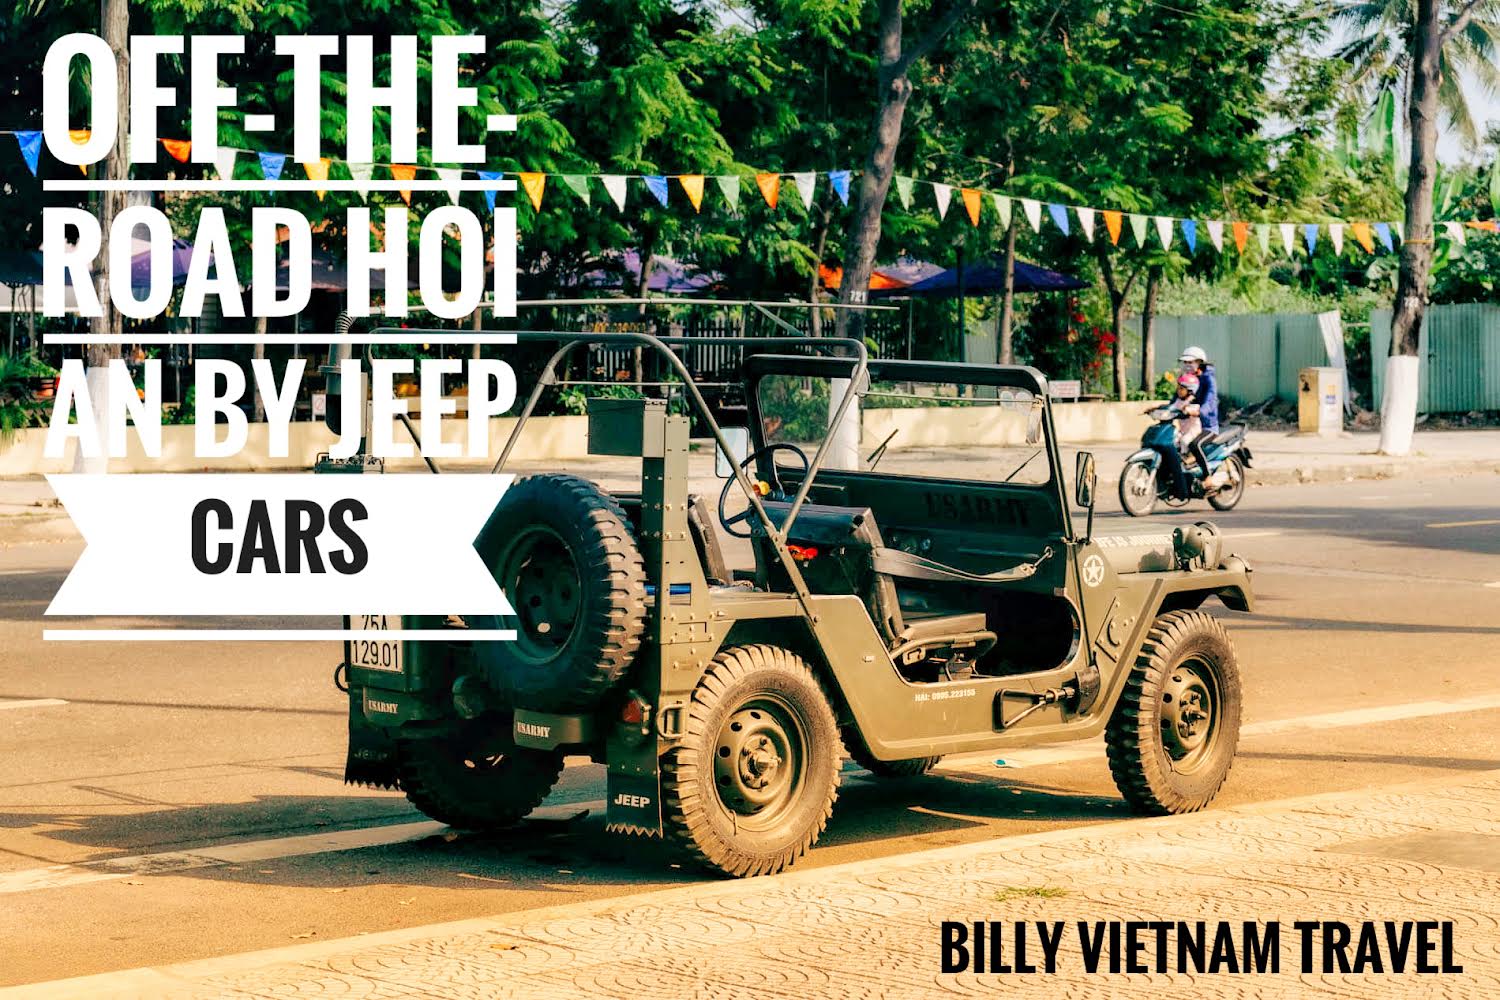 Off-the-road Hoi An by American Jeep cars